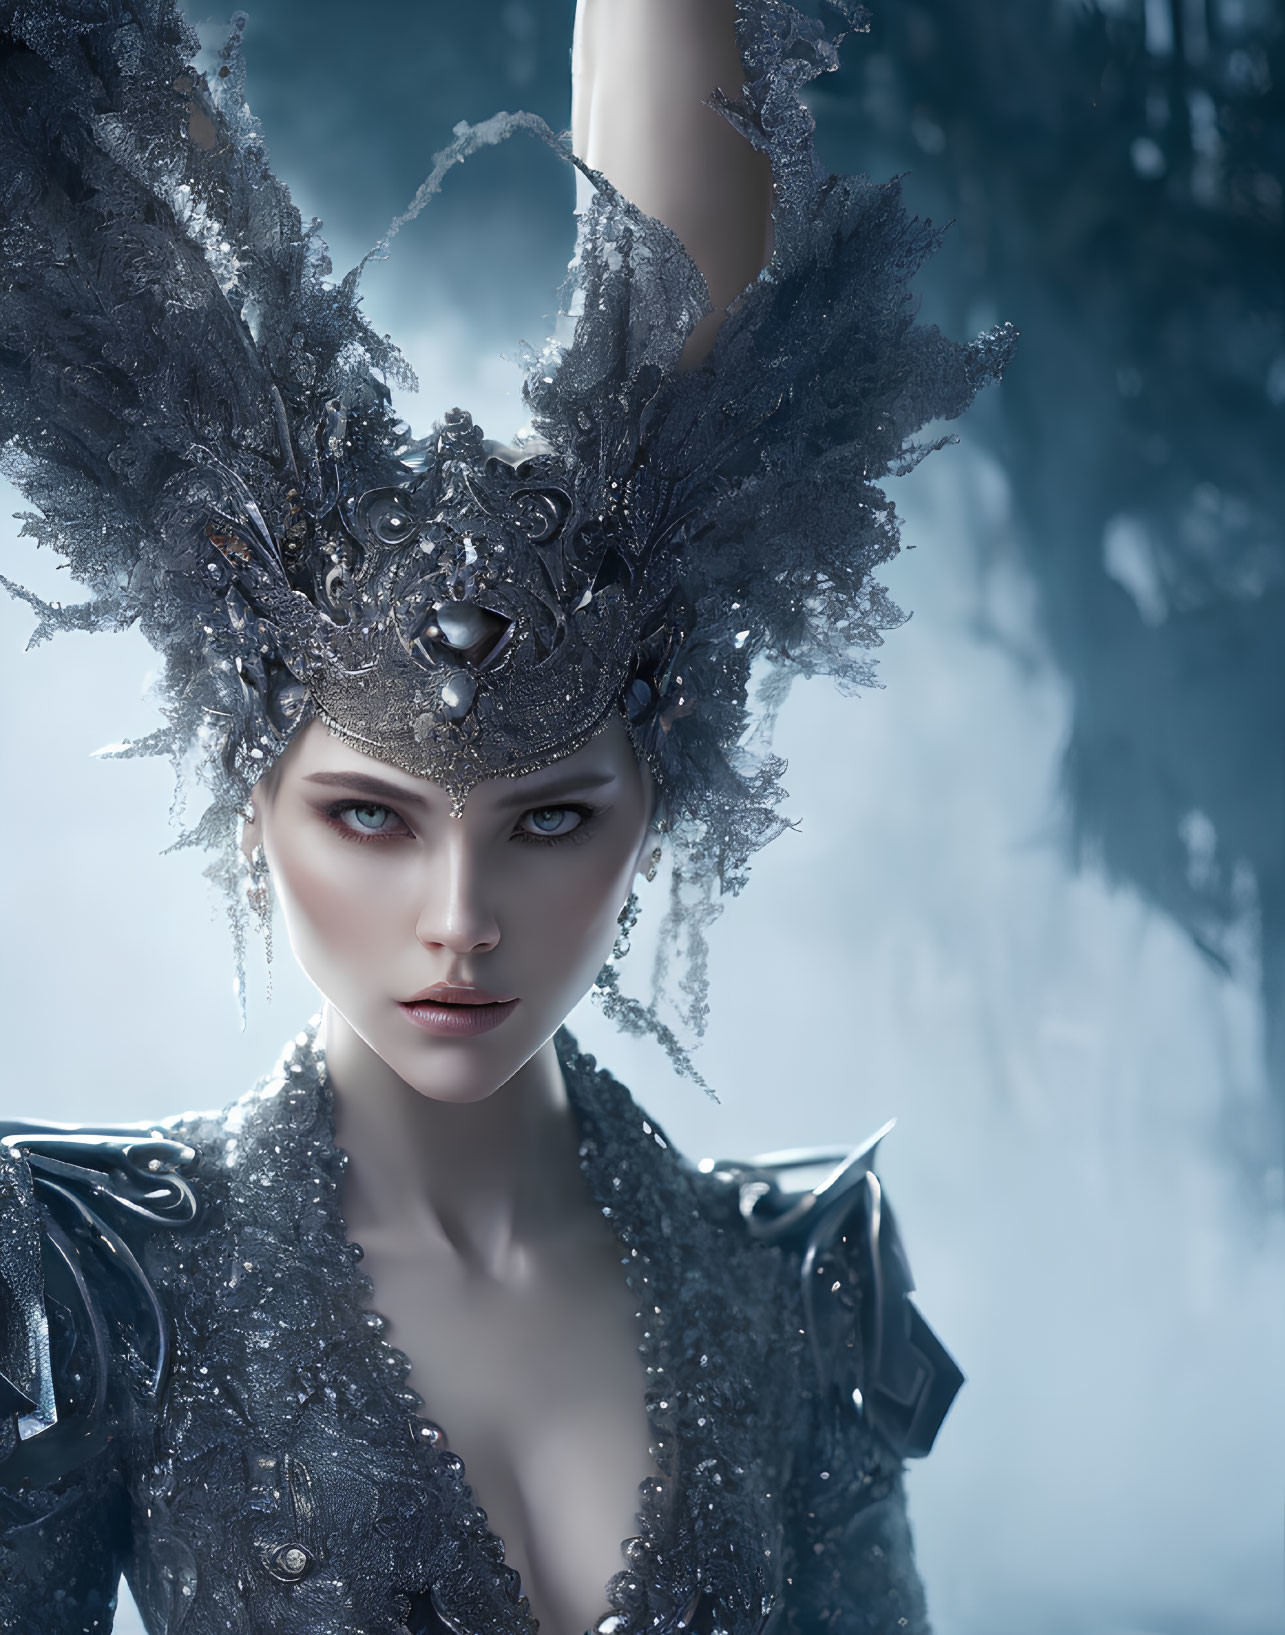 Mystical woman in silver headdress and ornate armor against icy backdrop